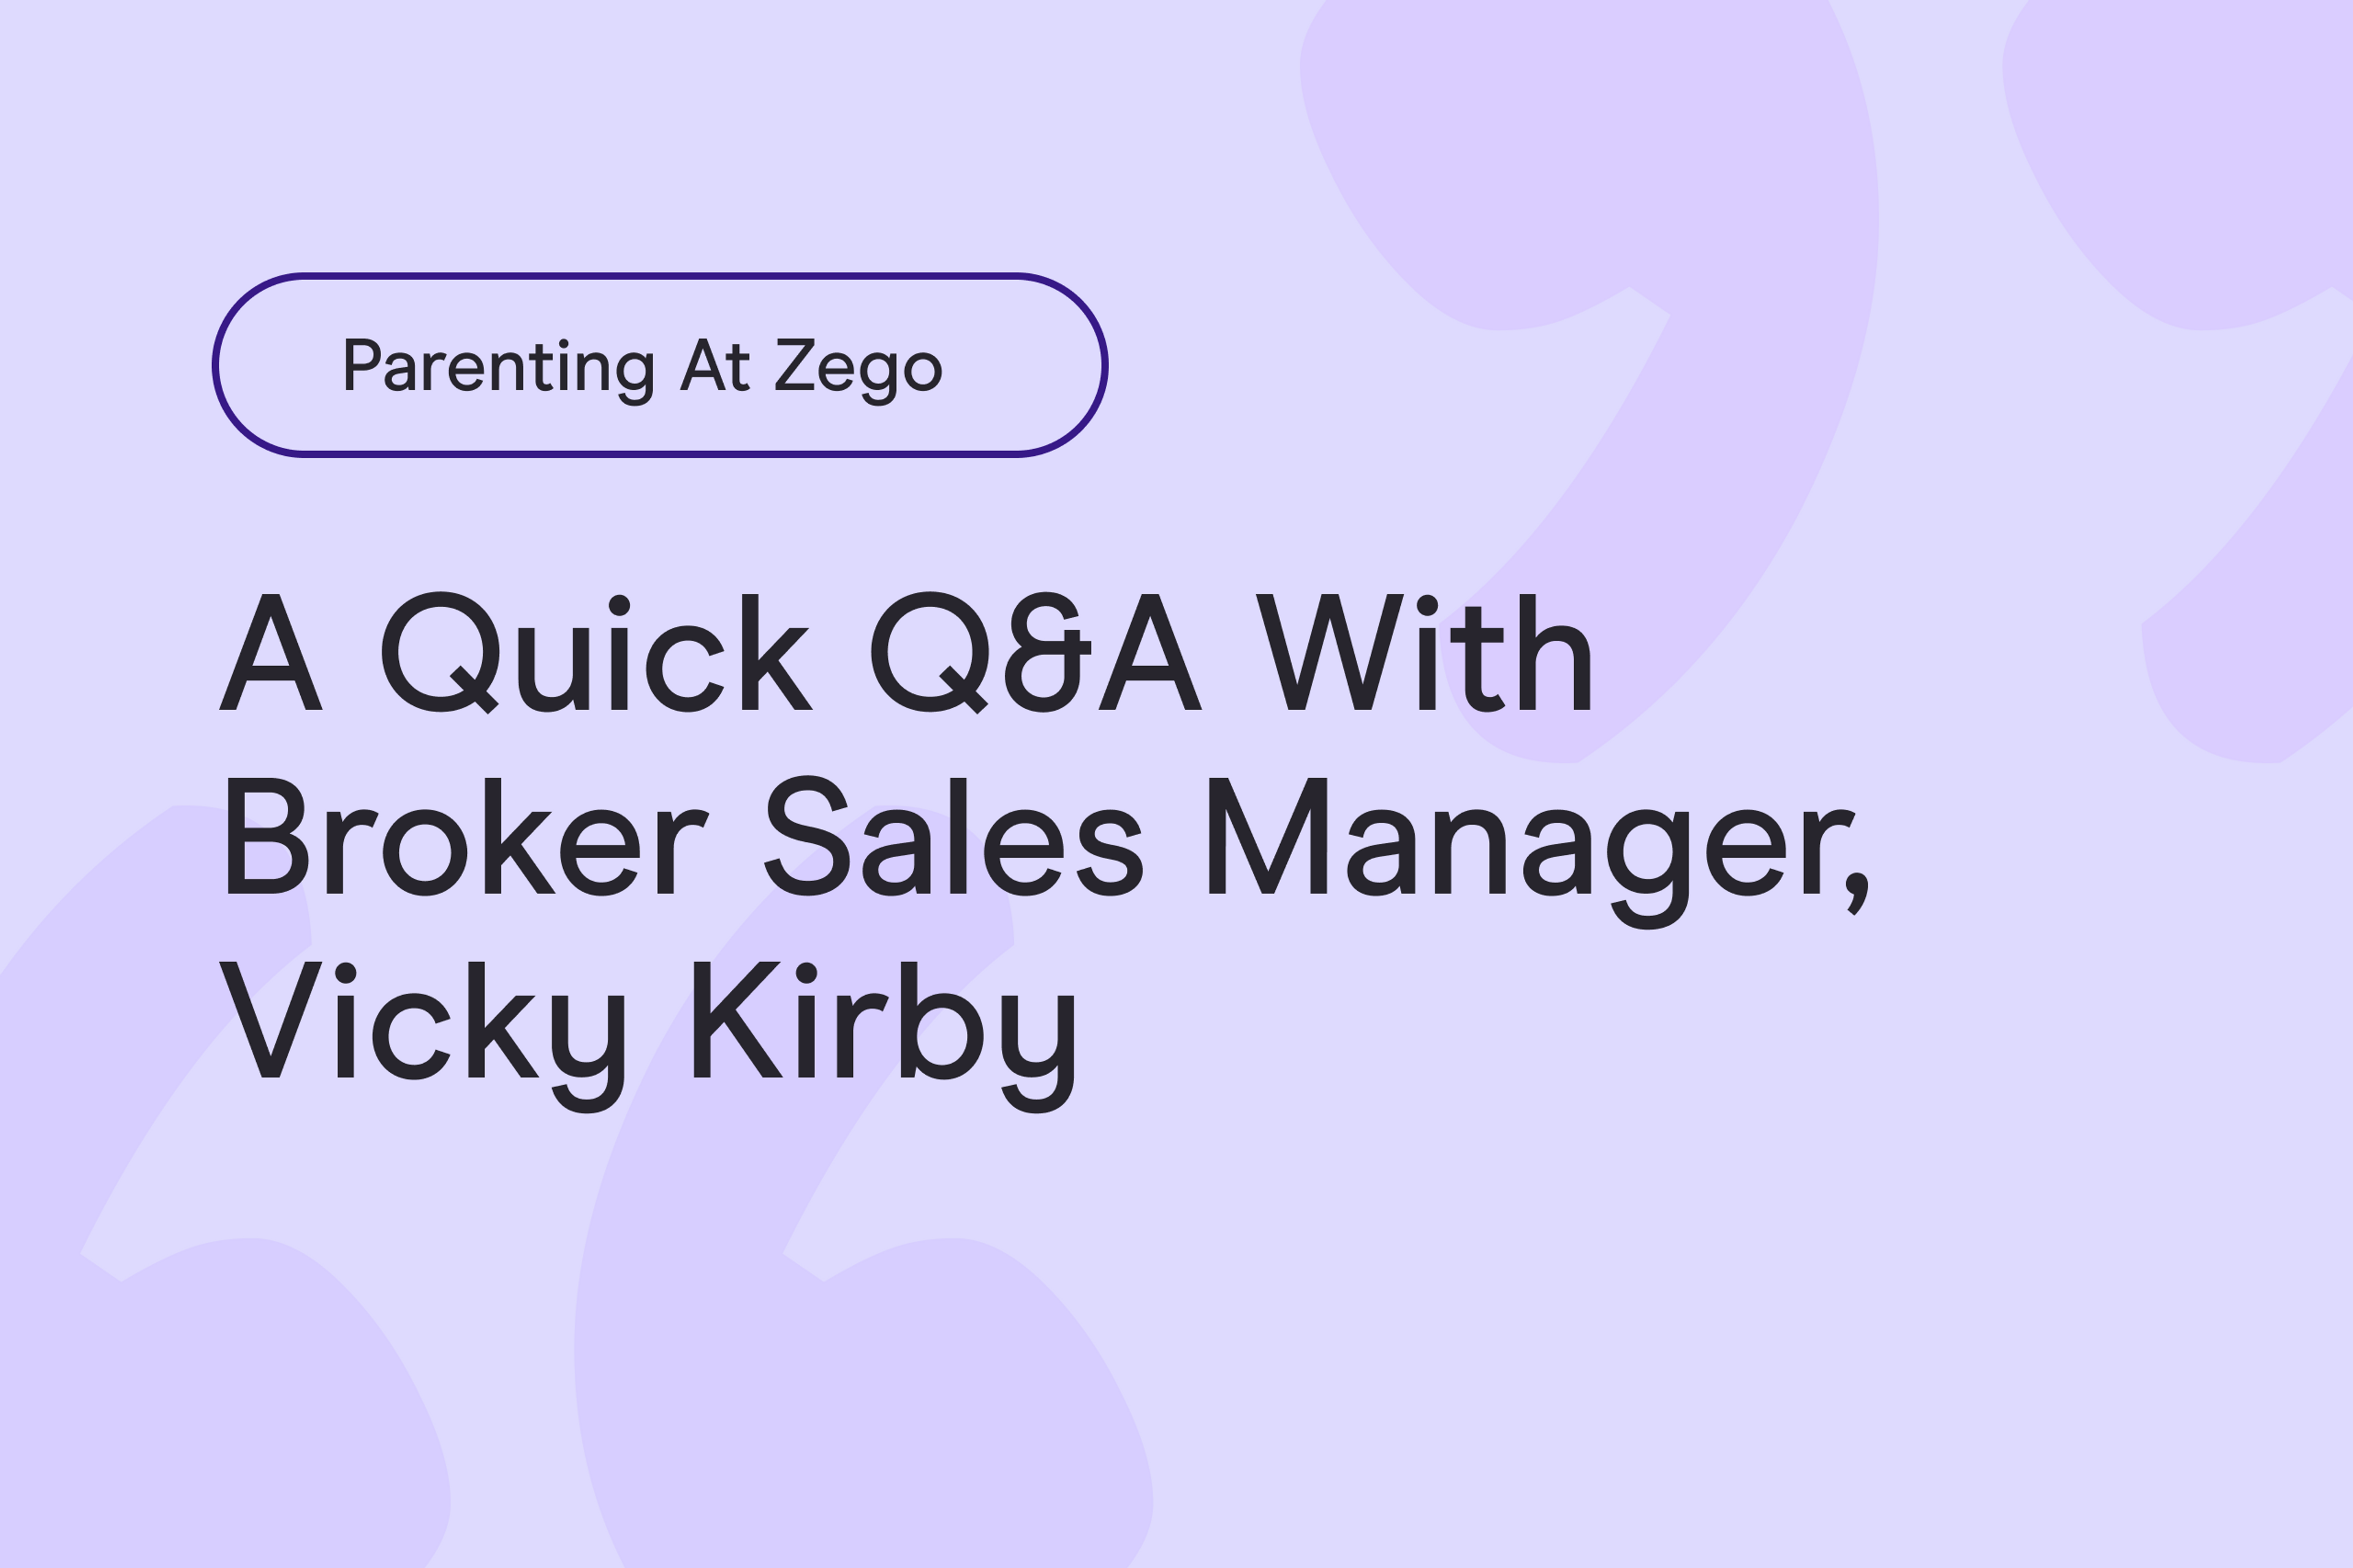 Parenting at Zego: a quick Q&A with Broker Sales Manager, Vicky Kirby